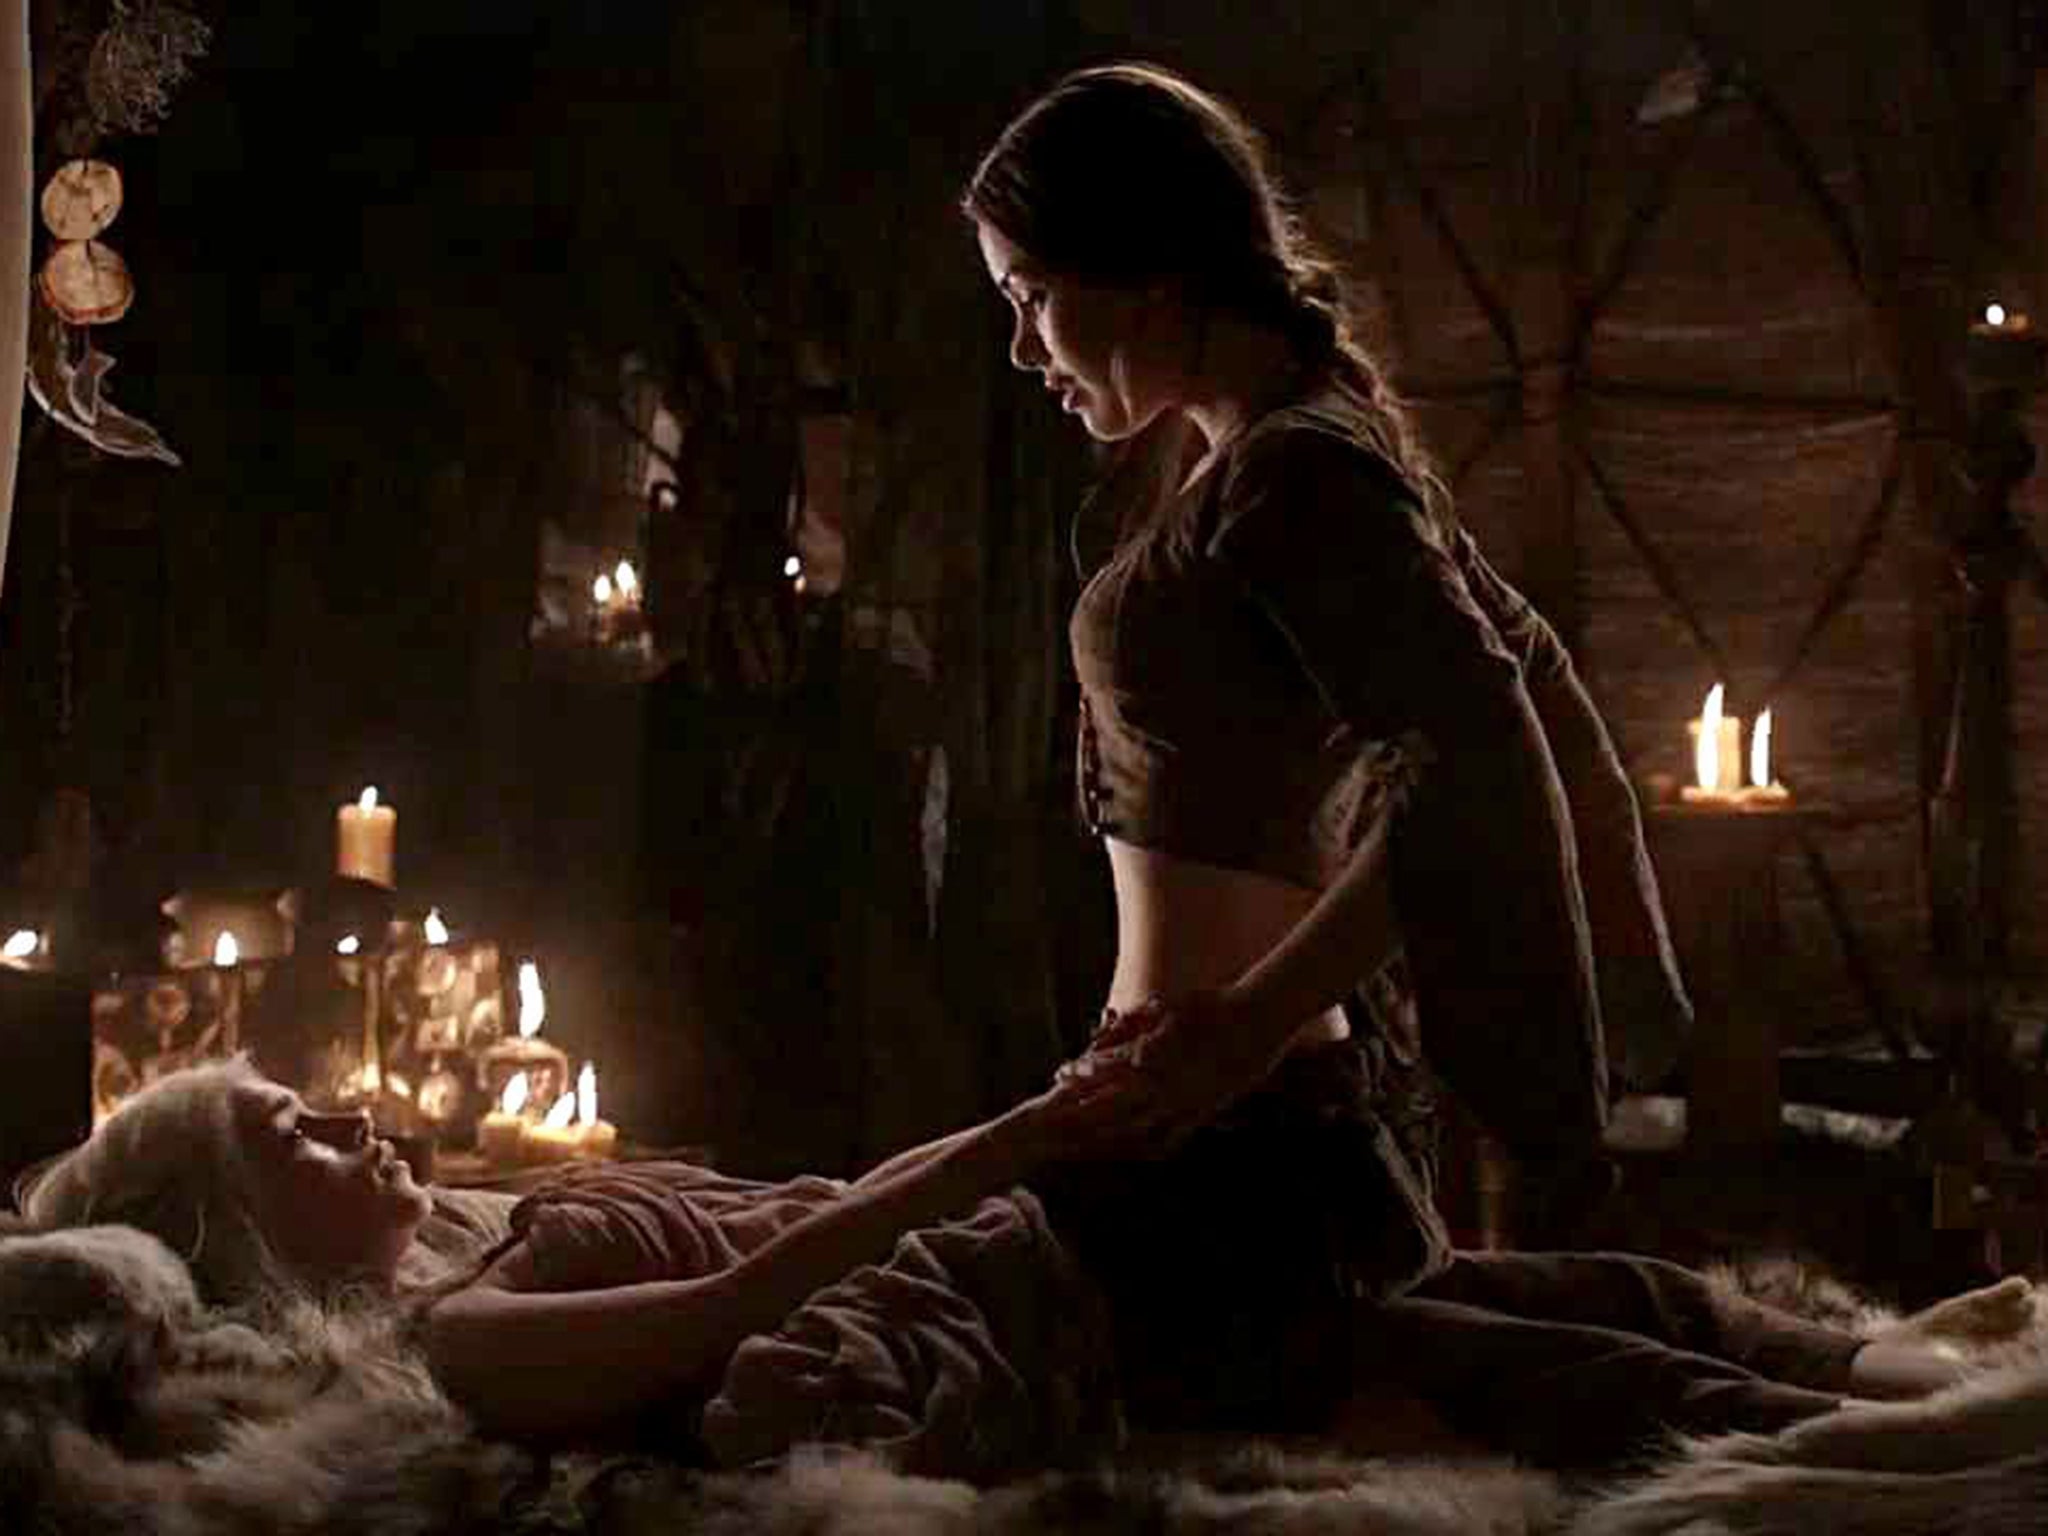 Game Of Thrones Sex Scenes Are Sexplanations To Distract From Boring